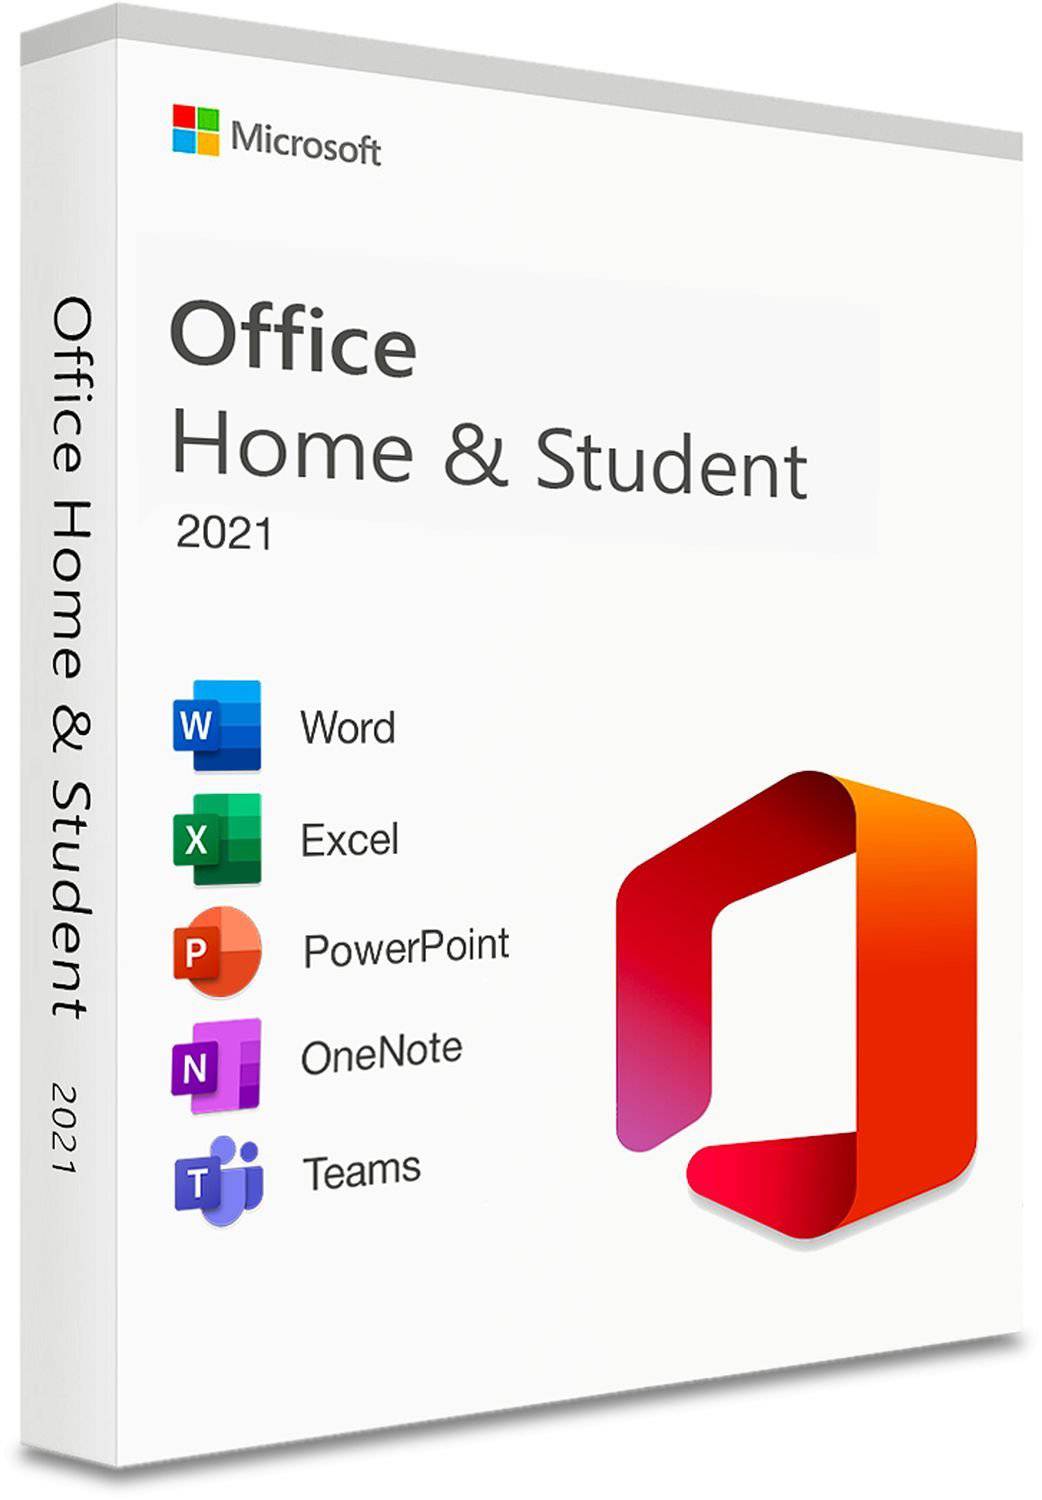 Microsoft Office 2021 Home and Student | Full Version | Lifetime License for Windows or MAC | Australian Stock